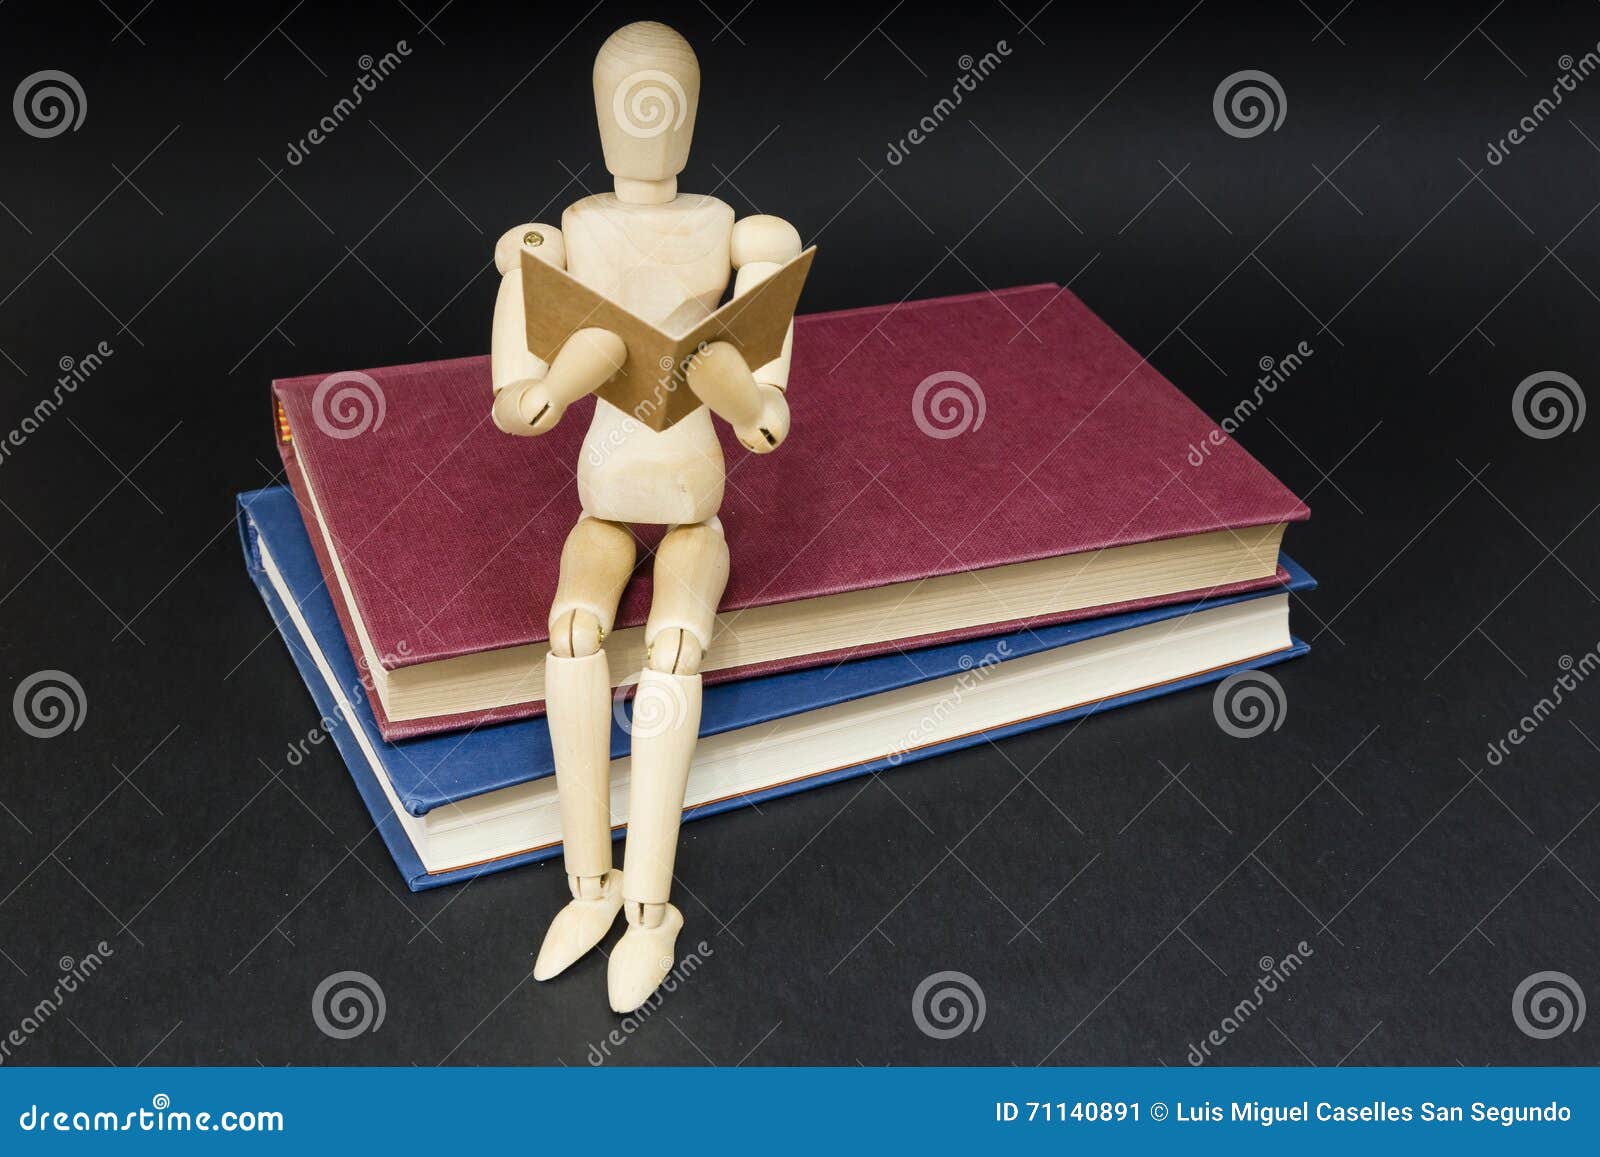 mannequin sitting on two books reading